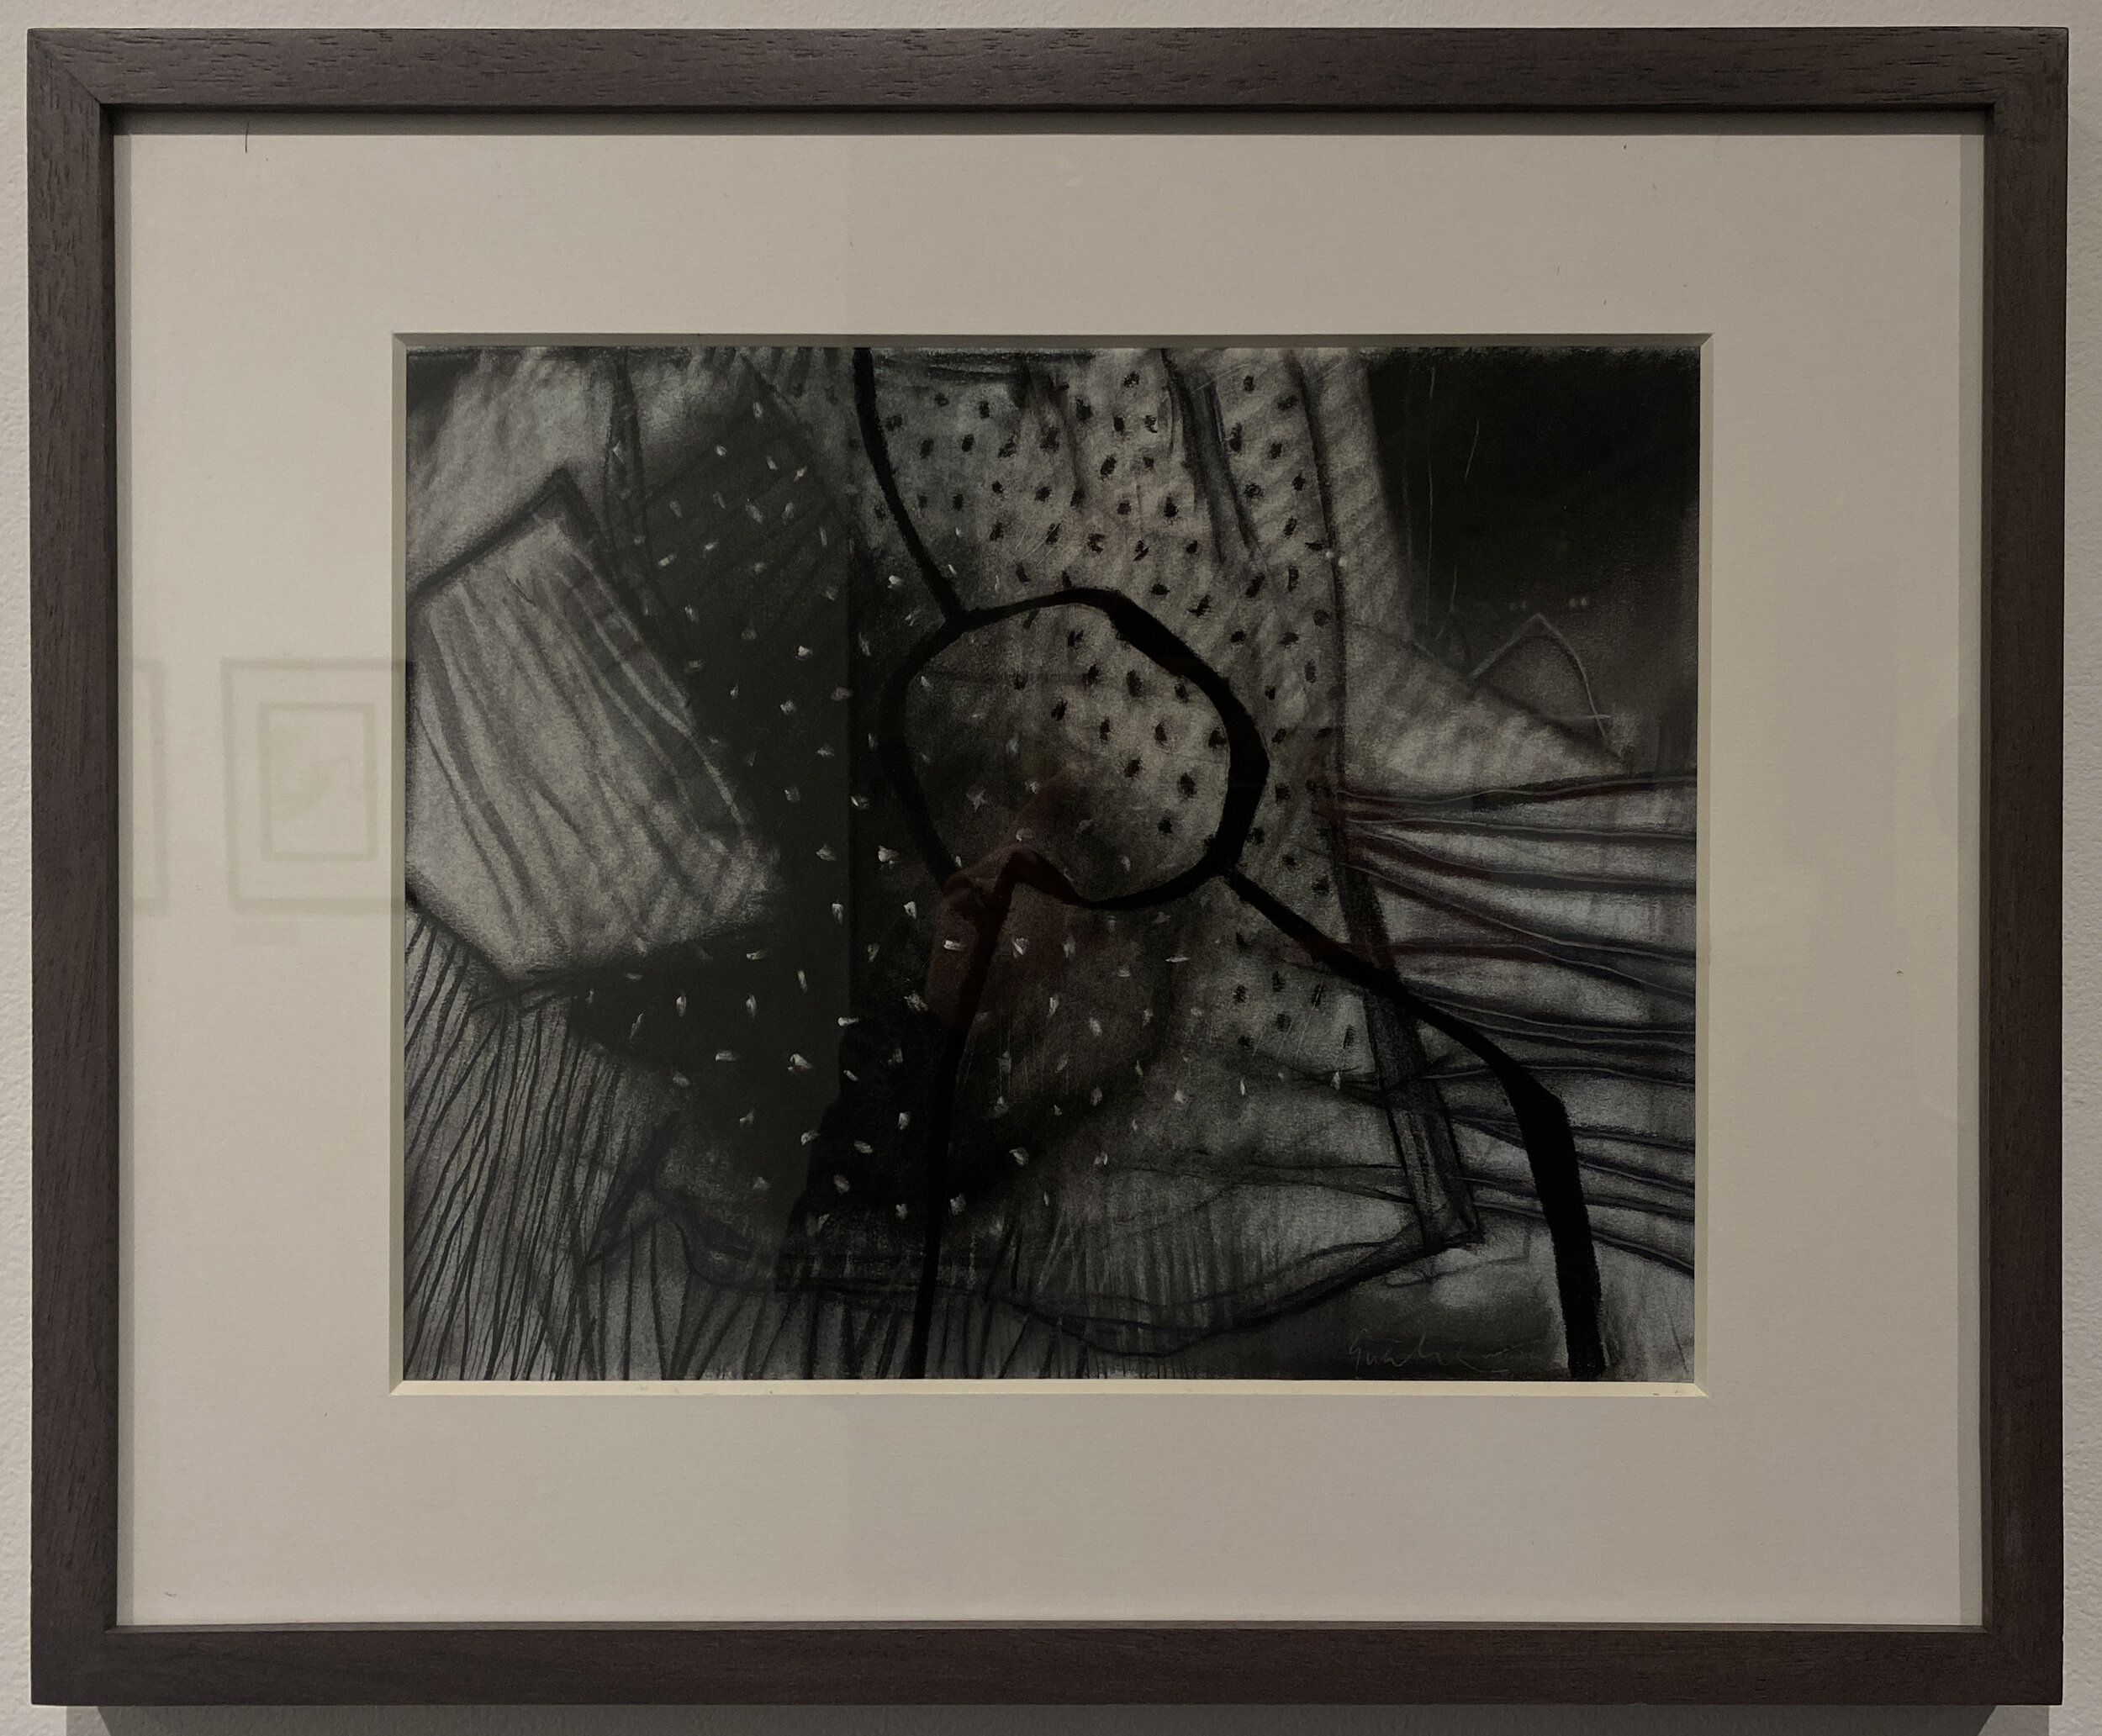  Pandemic drawing #66 (2020)  charcoal, compressed charcoal and mixed media on paper  10½ x 13½ inches 